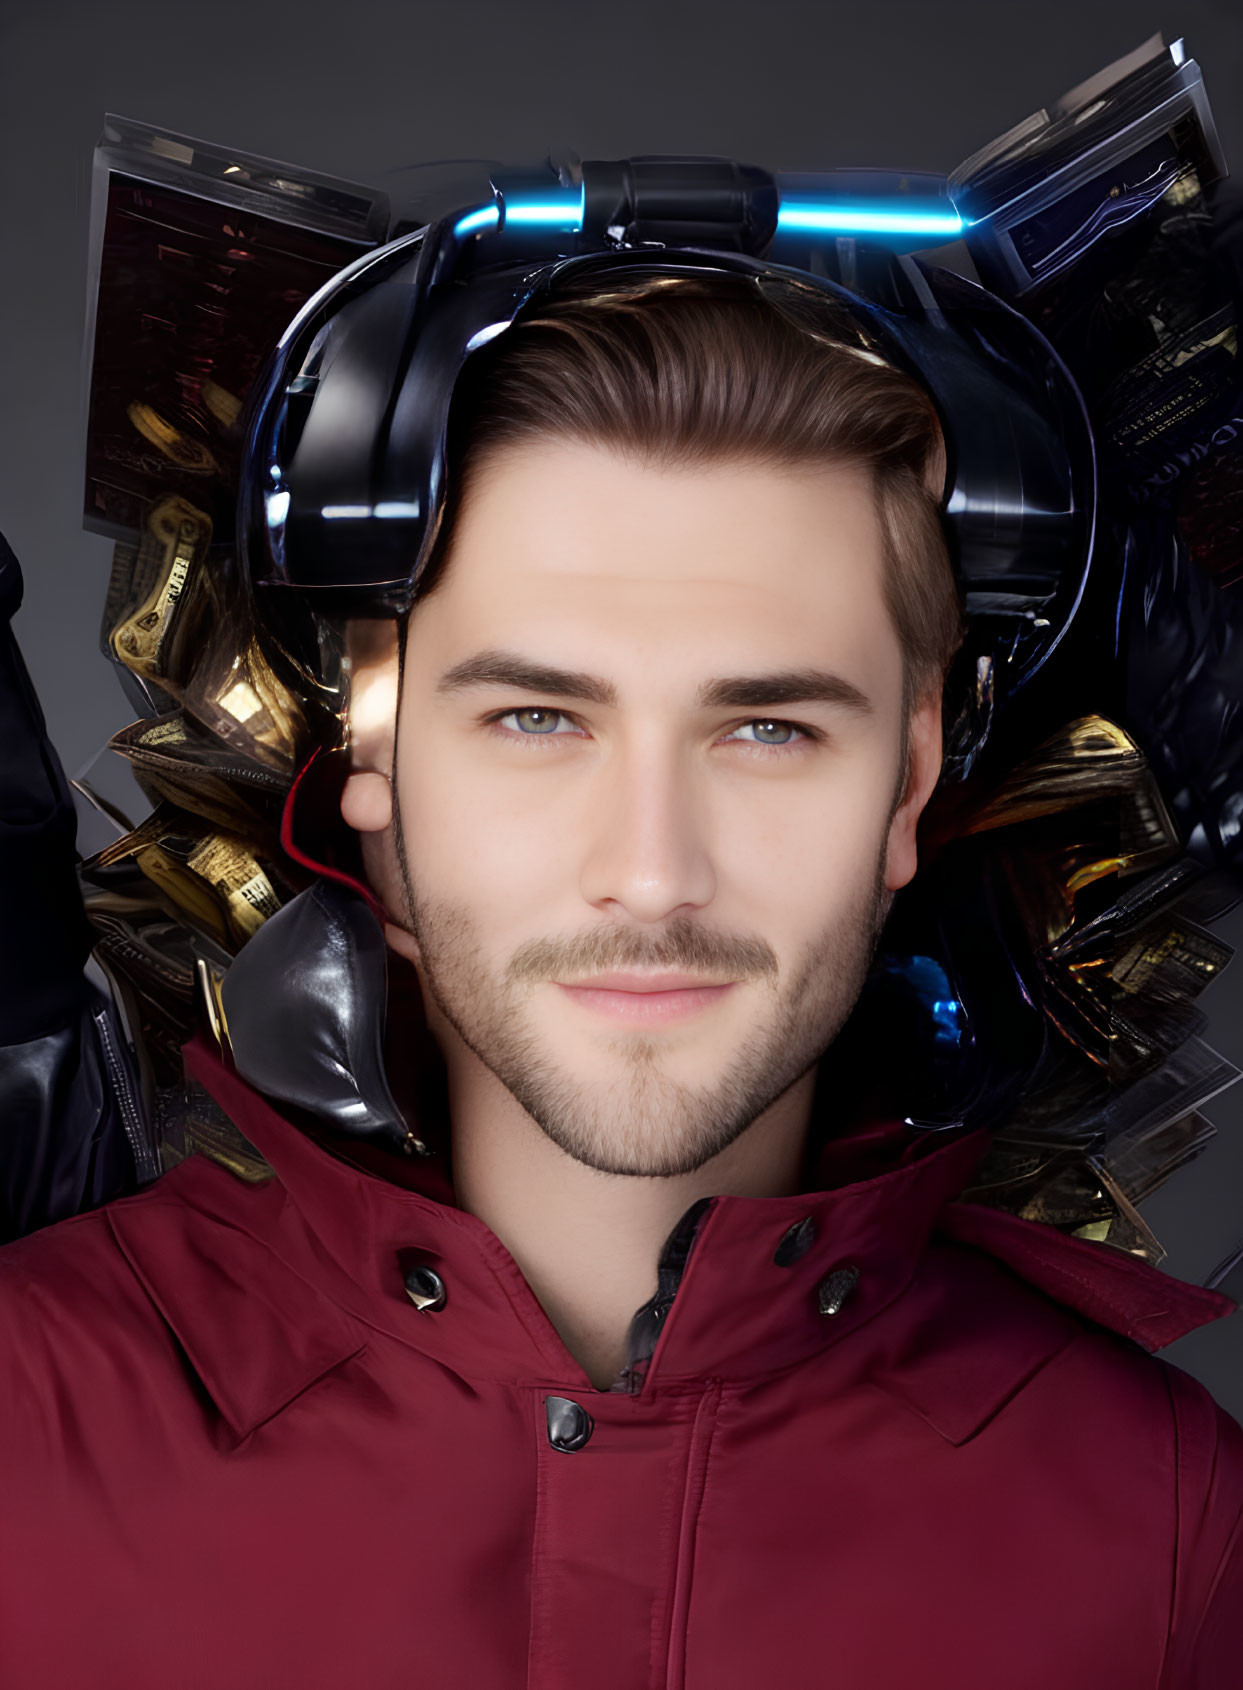 Bearded man in red jacket with futuristic headphones and floating gold bars